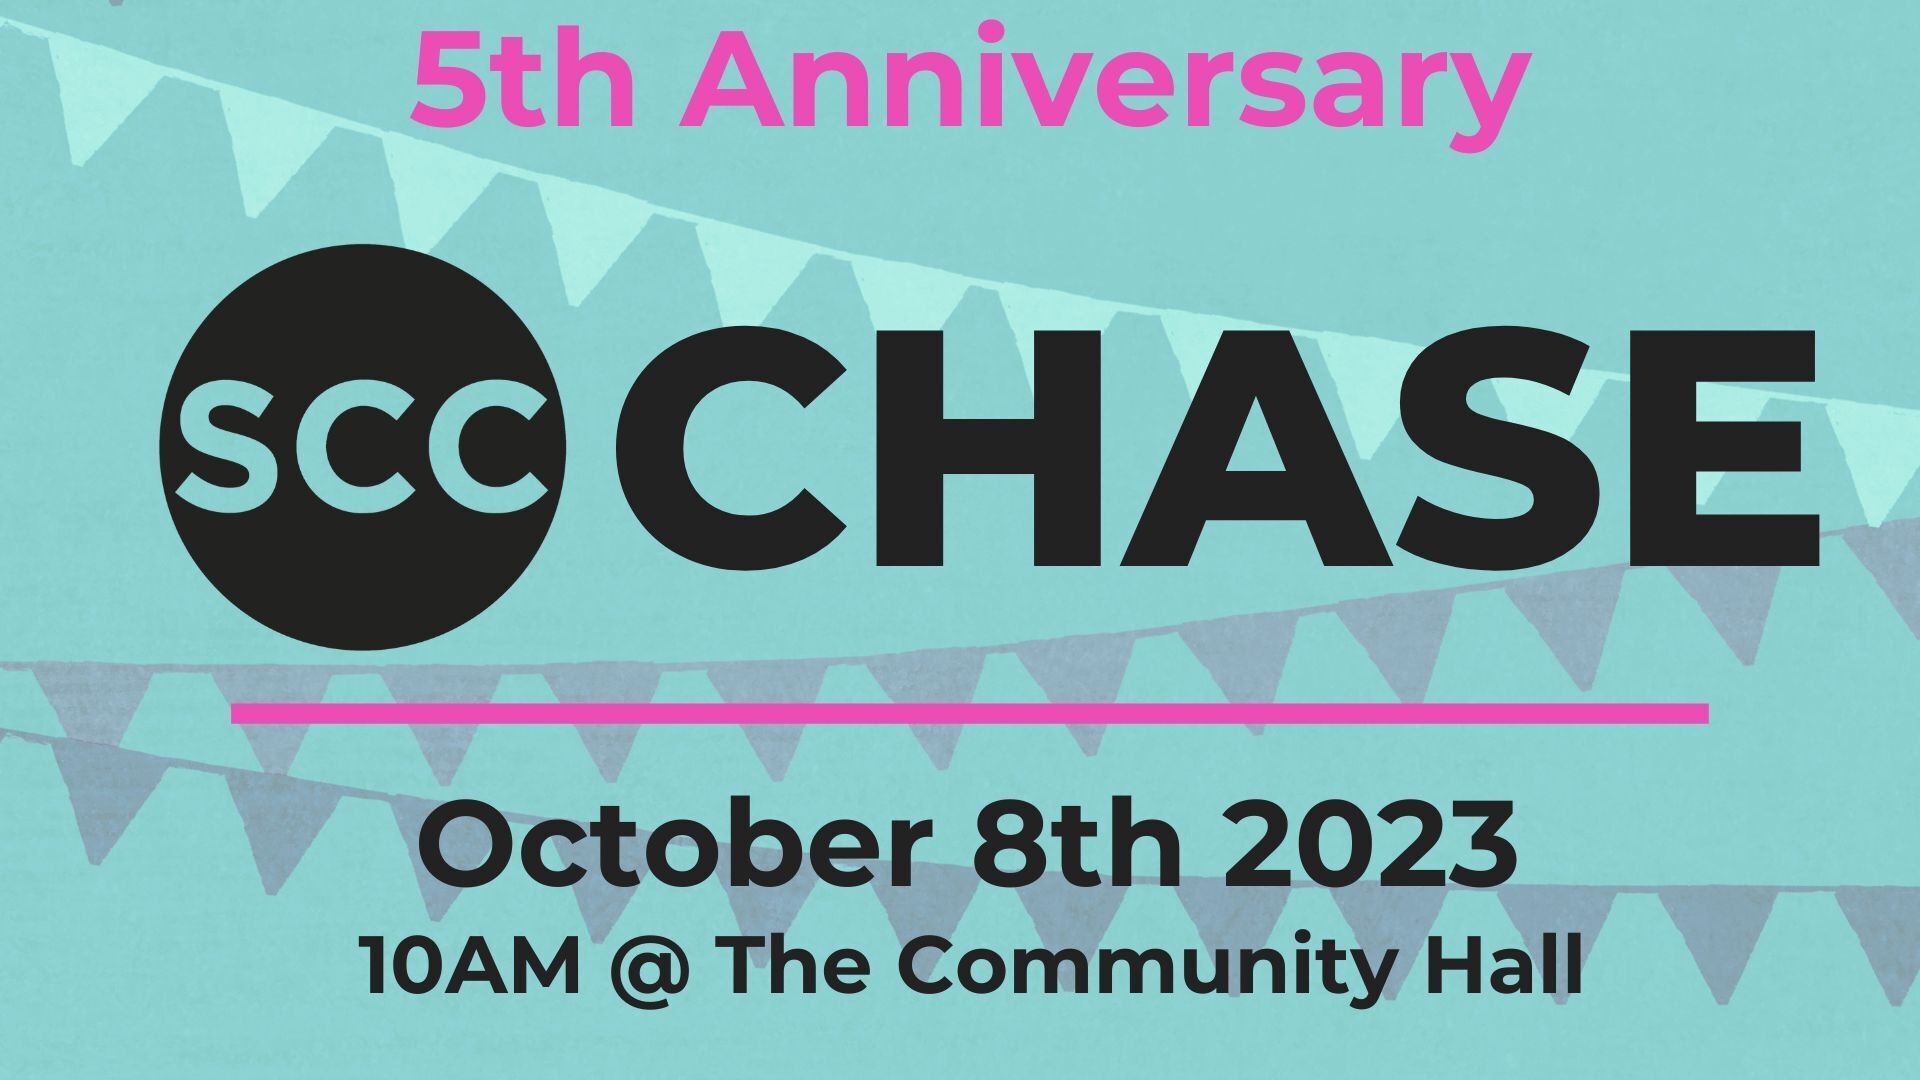 SCC Chase 5th Anniversary